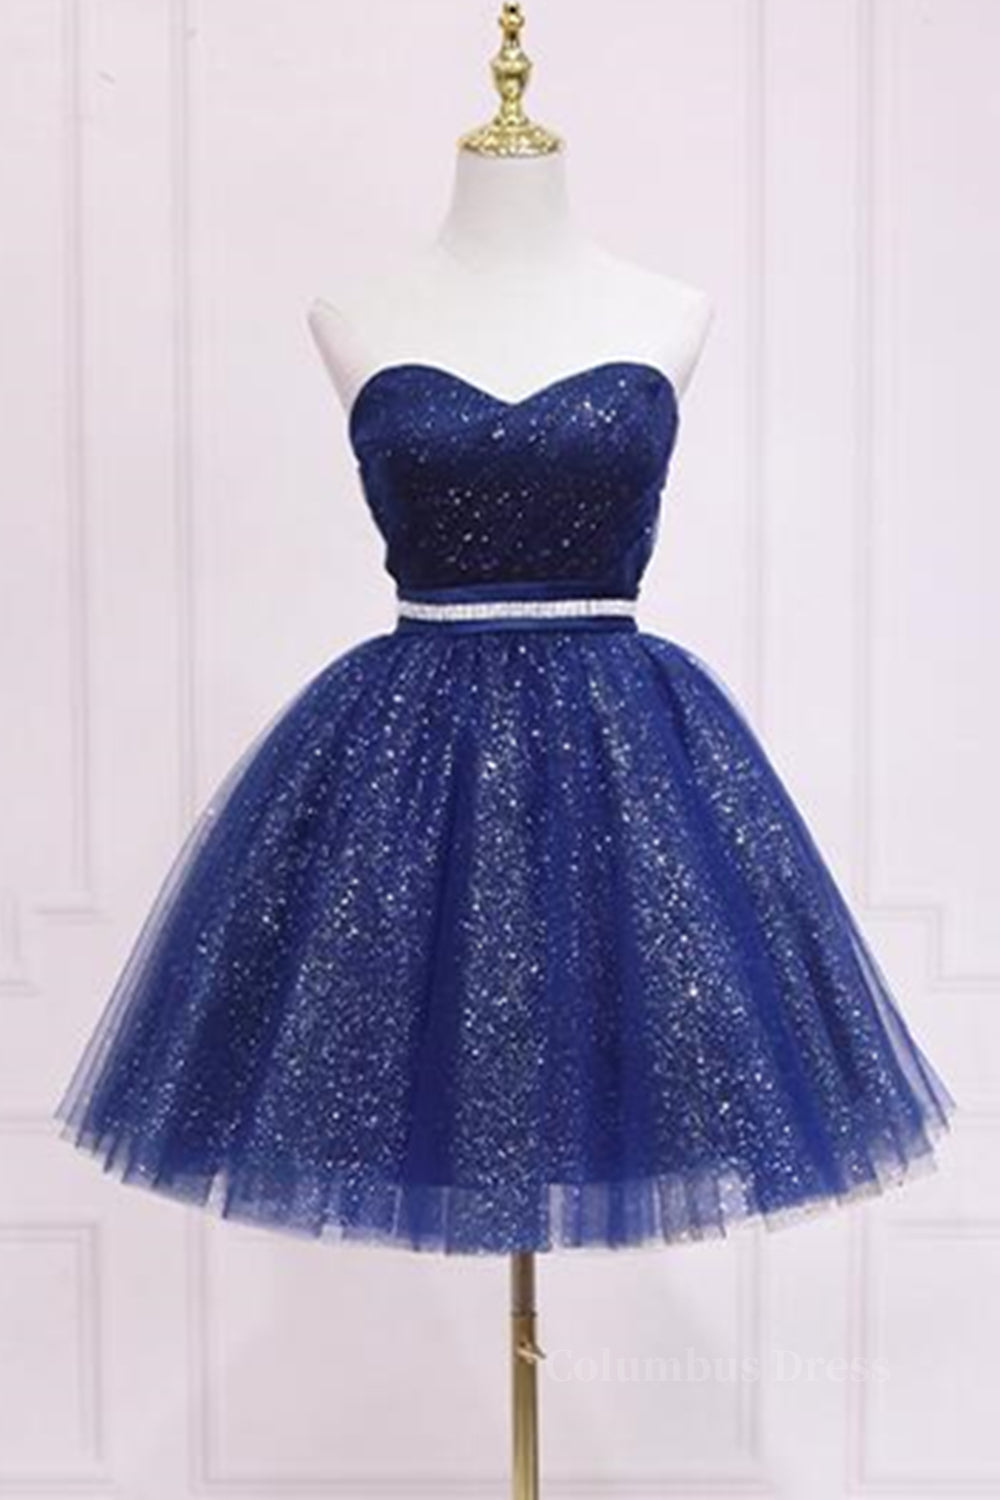 Evening Dresses 2029, Shiny Strapless Sweetheart Neck Blue Short Prom Homecoming Dress with Belt, Sparkly Blue Formal Evening Dress